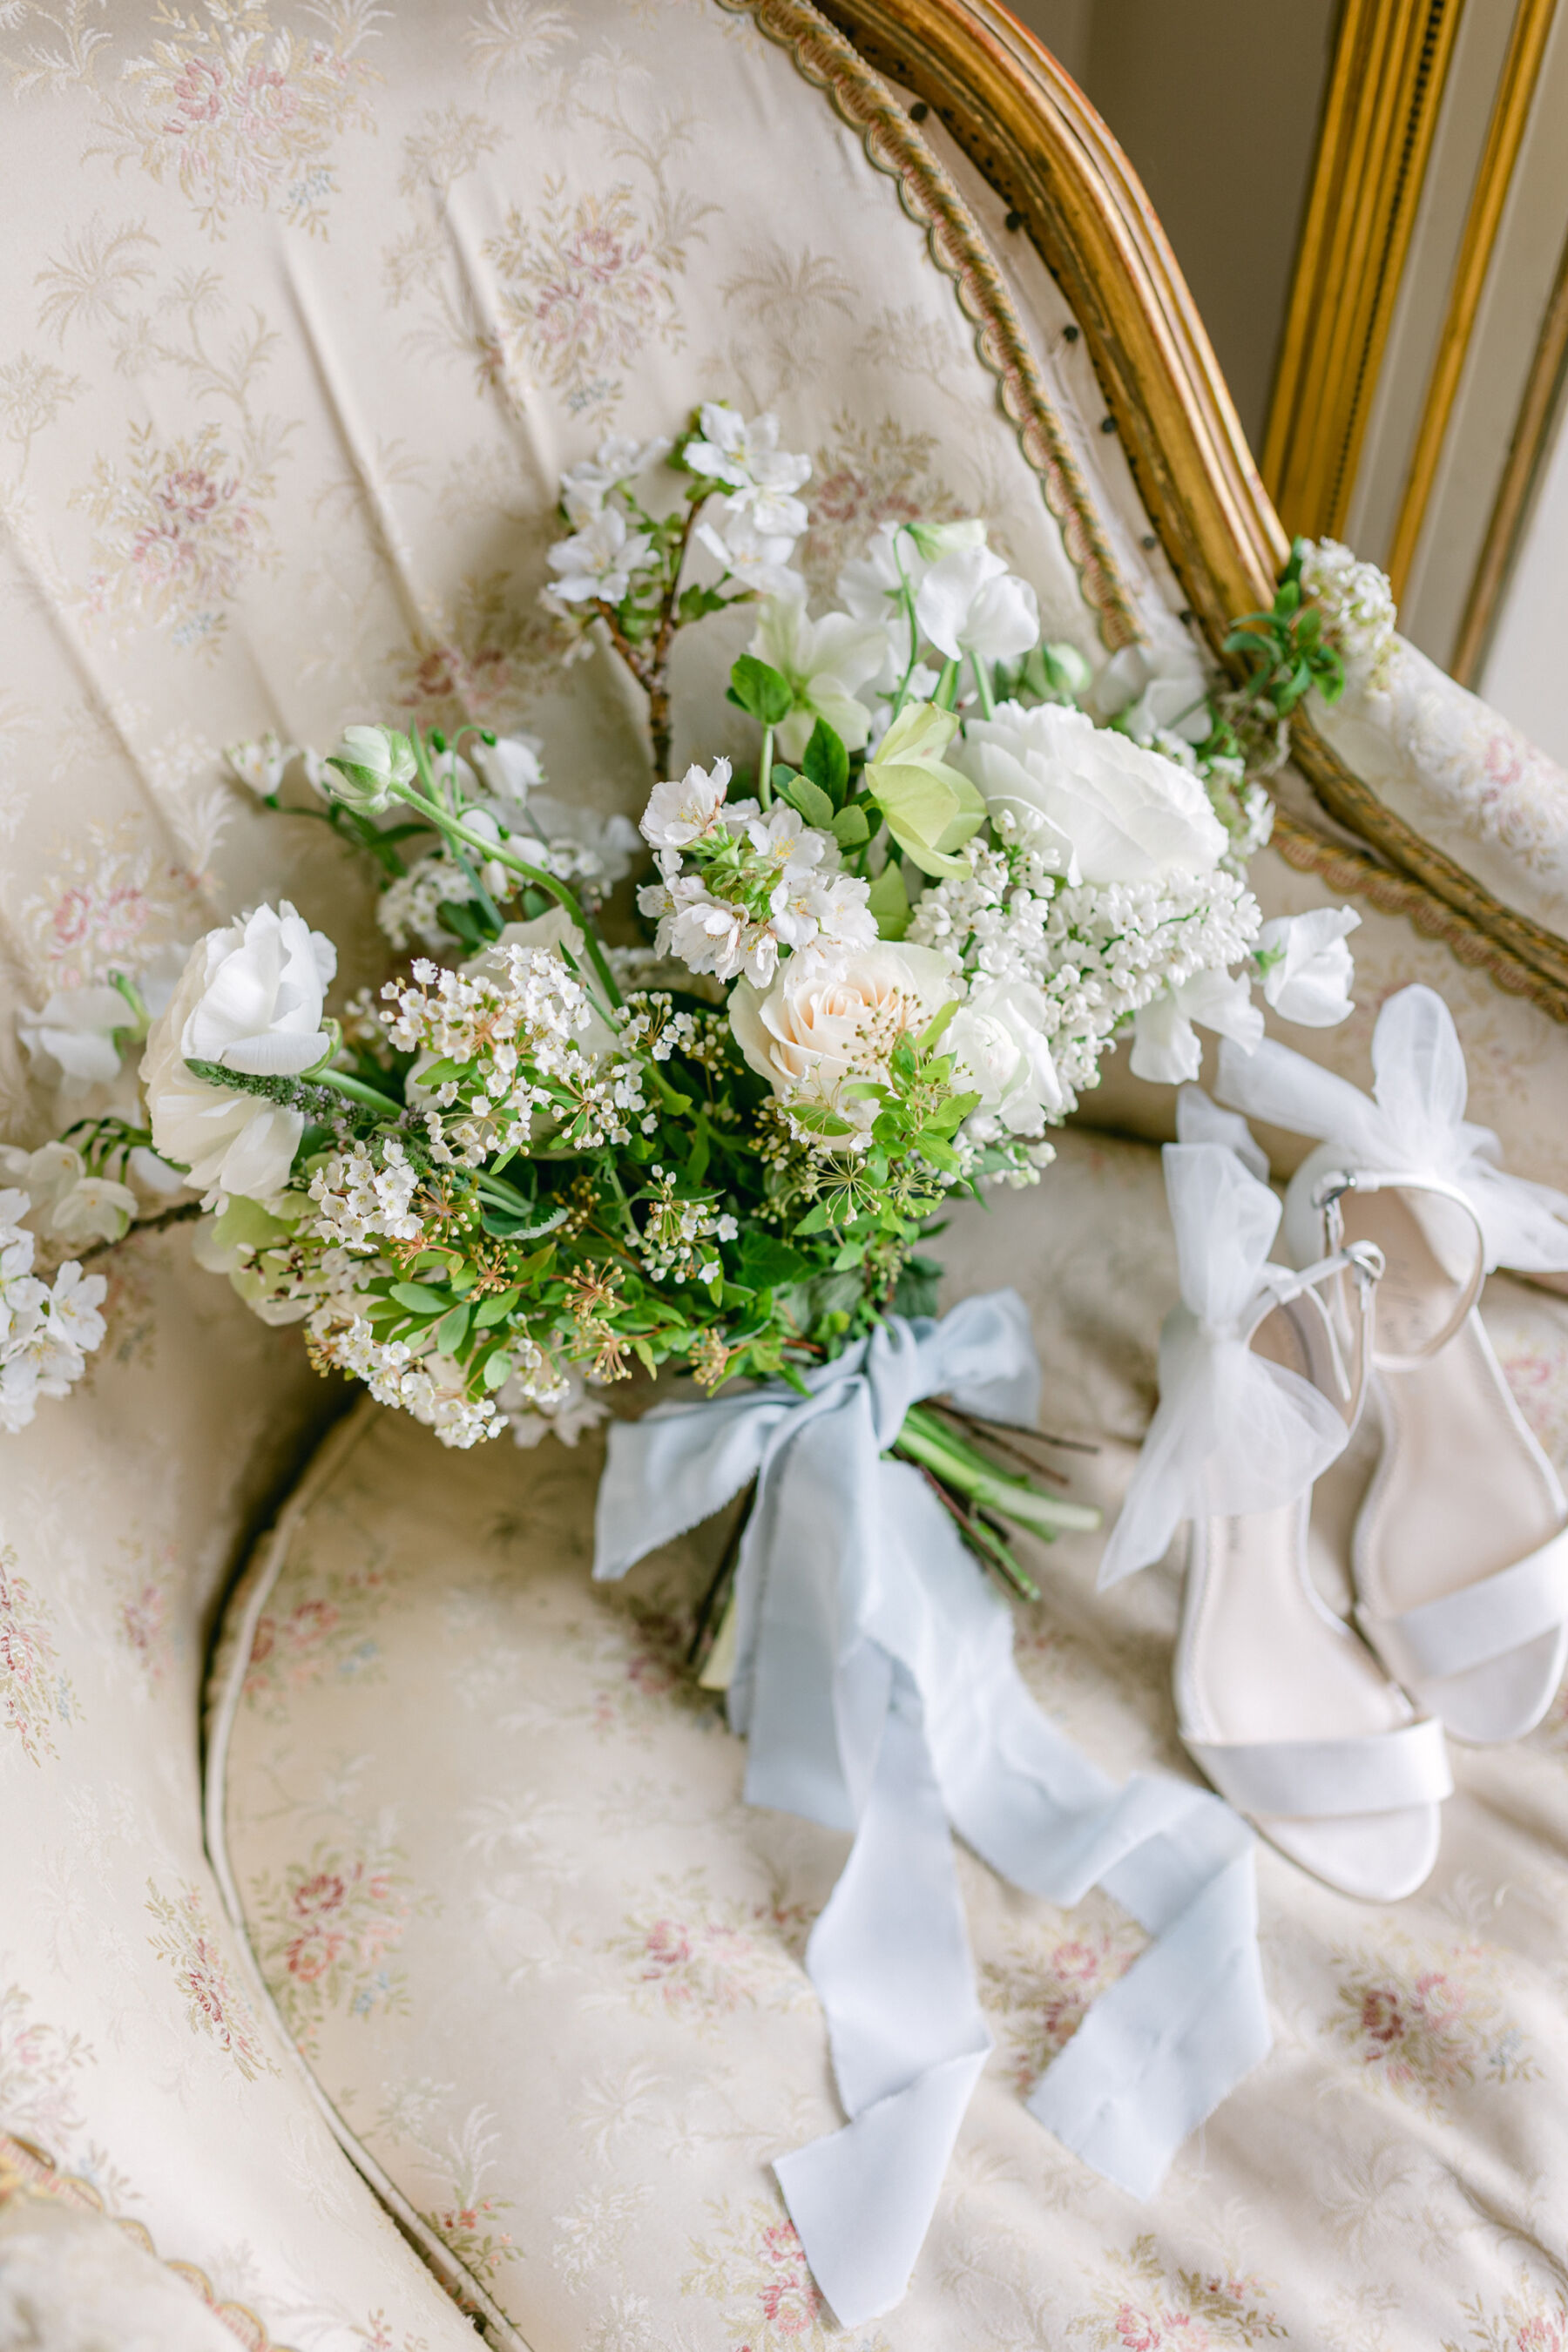 Elegant and romantic Spring bridal bouquet by Blue Sky Flowers. The bouquet is tied with a pale blue silk ribbon and comprises of all white flowers. Nearby is a pair of Bella Belle high heel open toe strappy bridal sandals, with a tulle ankle bow.